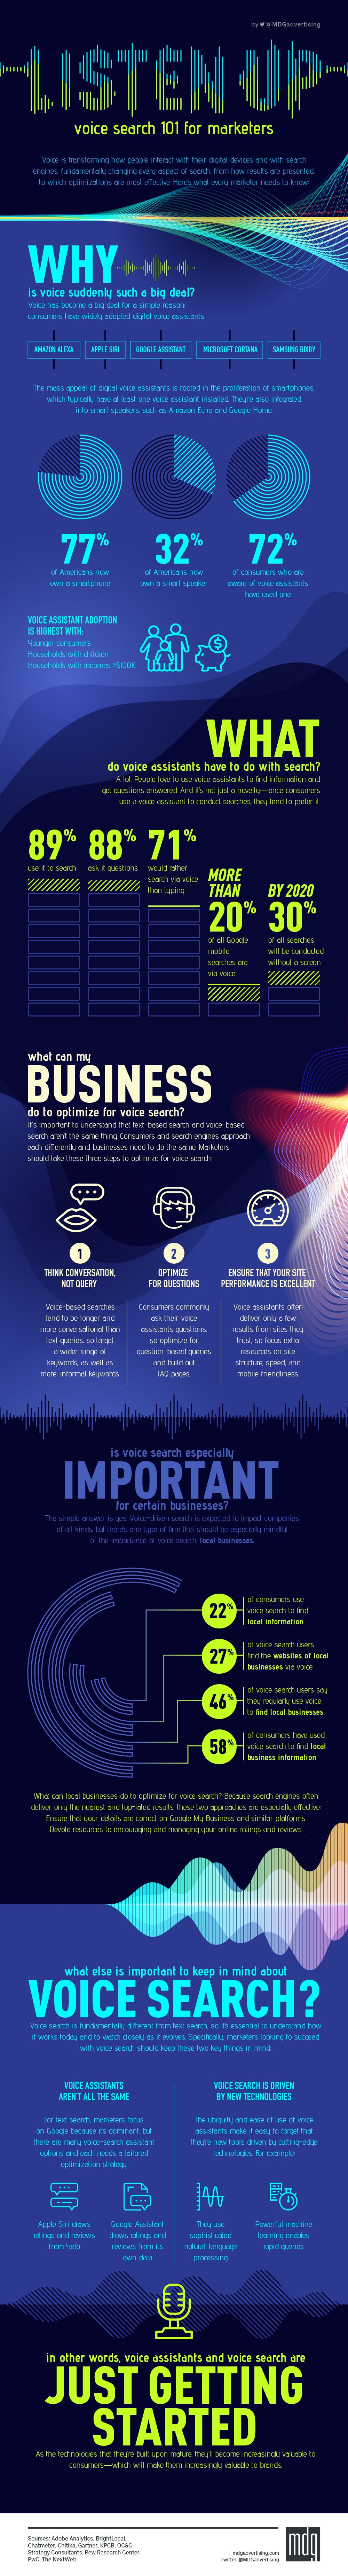 Voice Search Infographci